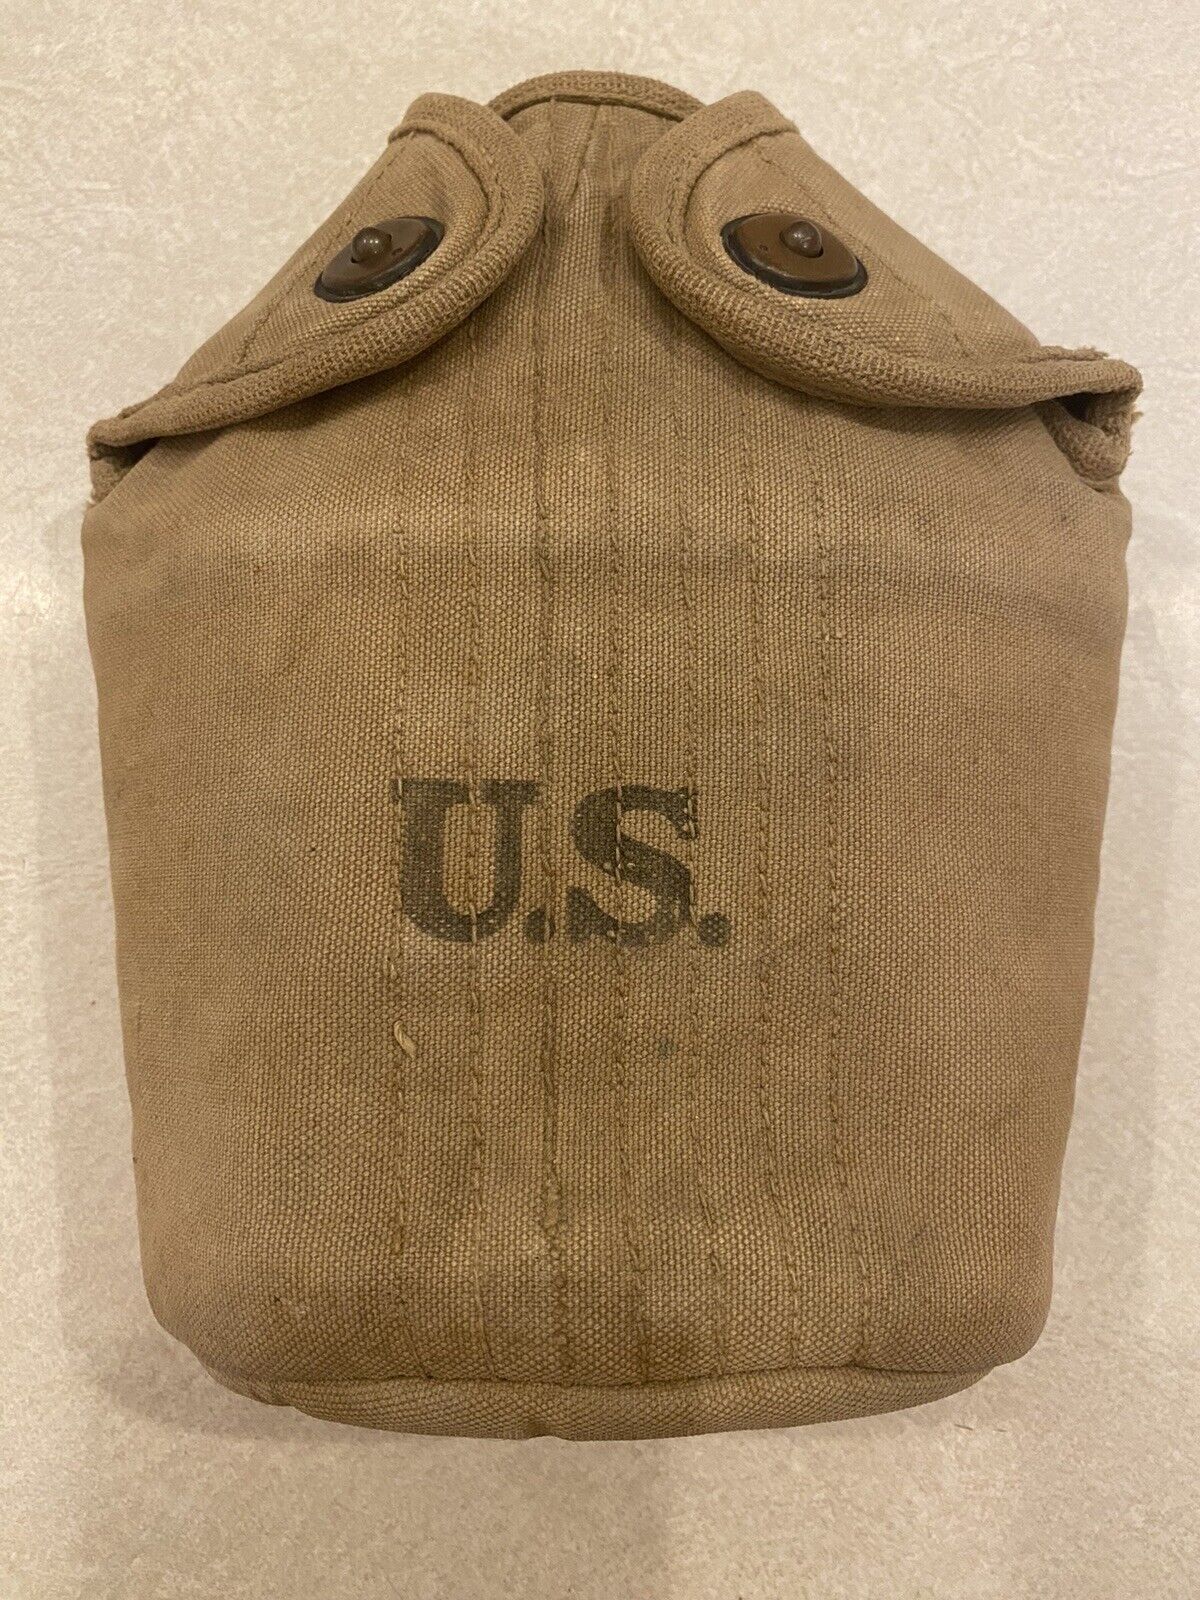 WW1 US Army M-1910 Canteen Cover 1918 Dated 